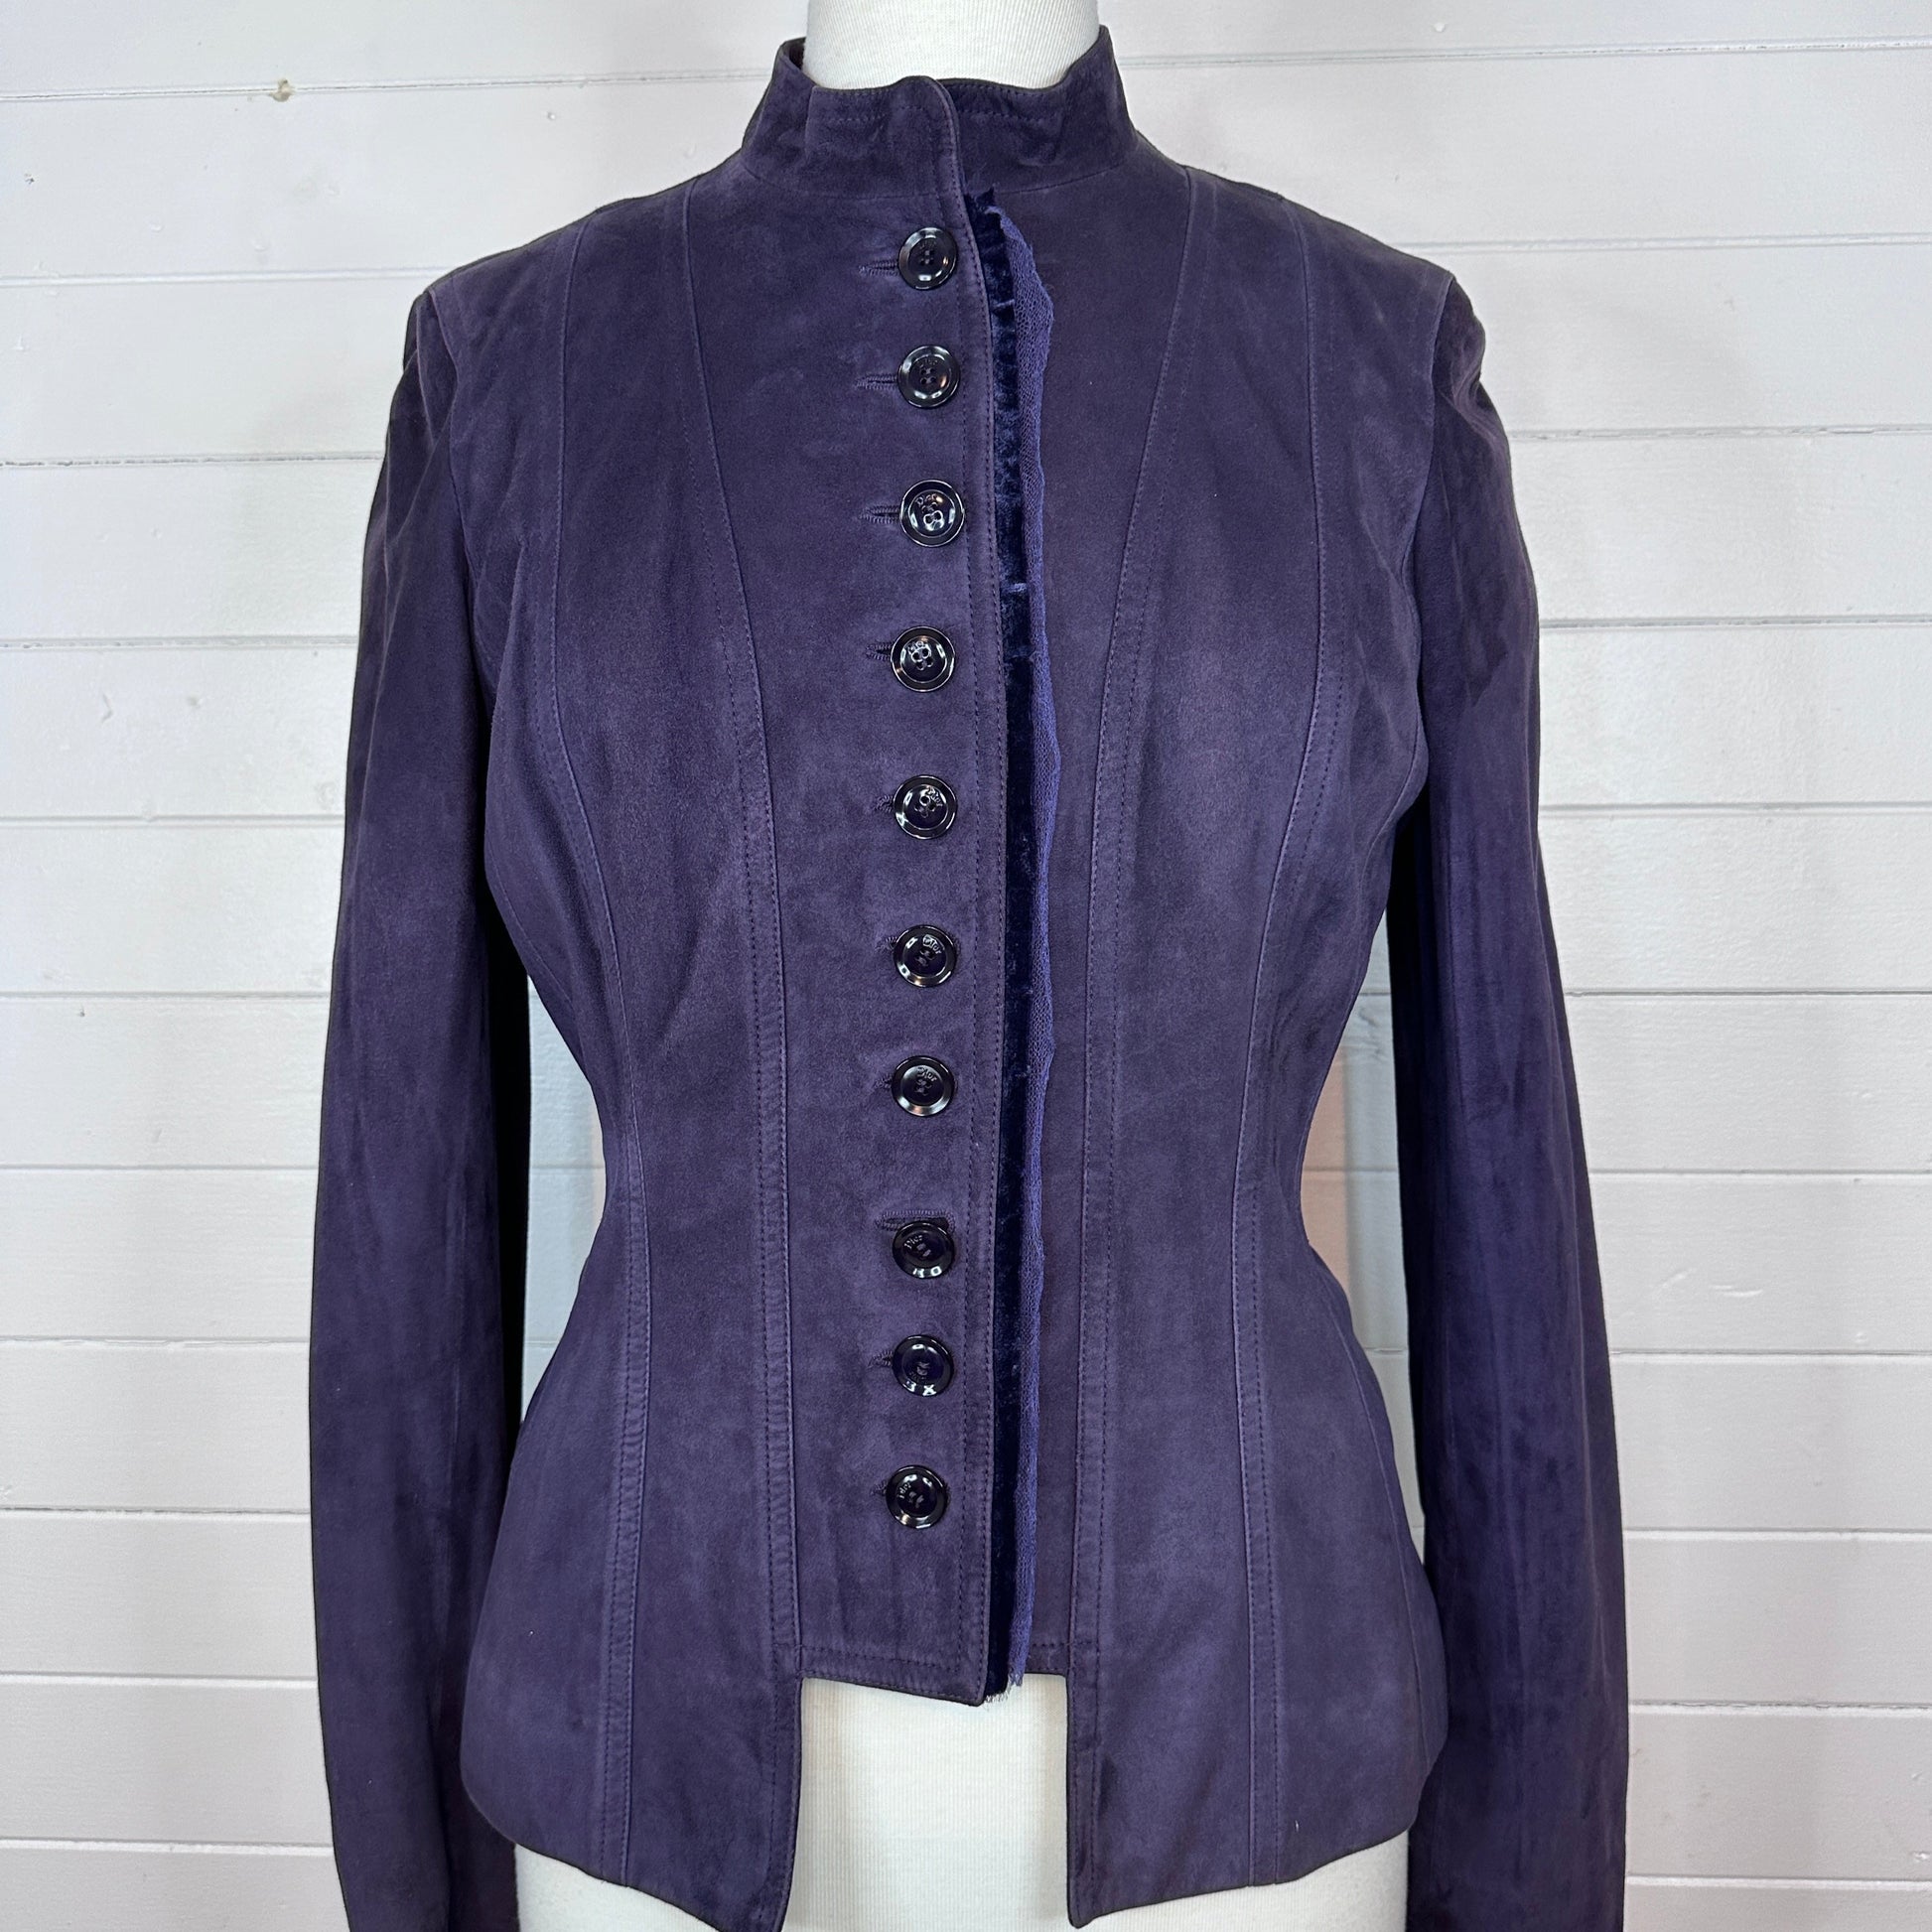 Christian Dior Purple Suede Military Style Jacket